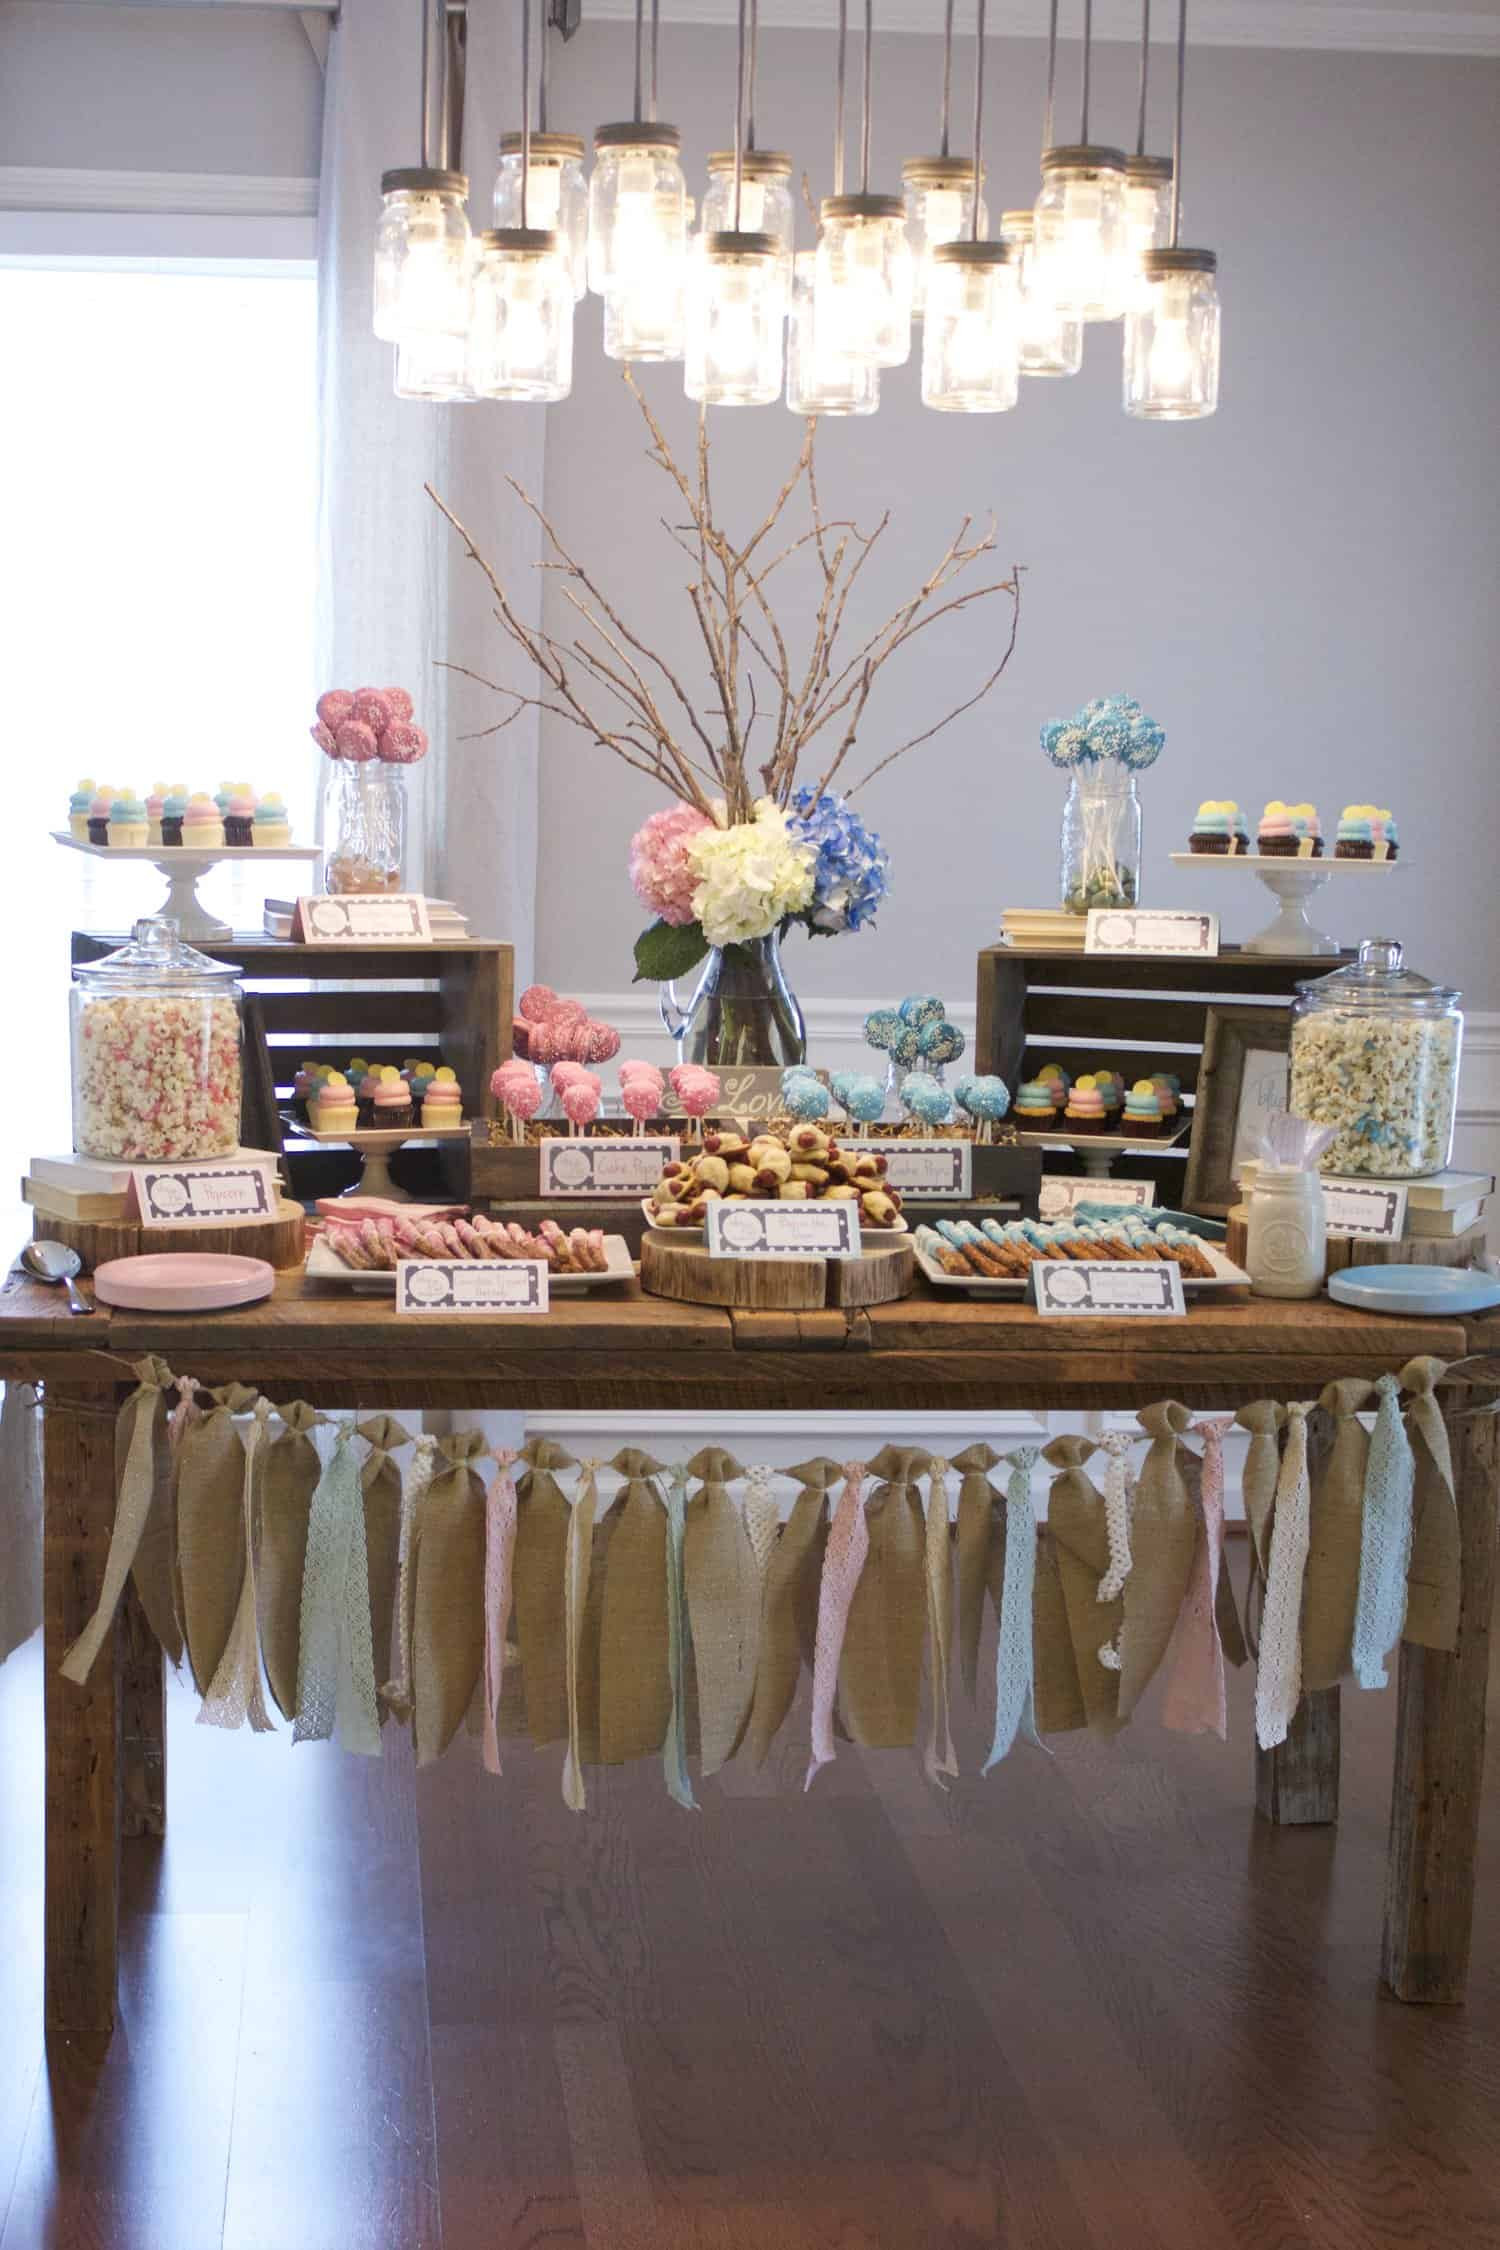 Good Ideas For A Gender Reveal Party
 17 Tips To Throw An Unfor table Gender Reveal Party